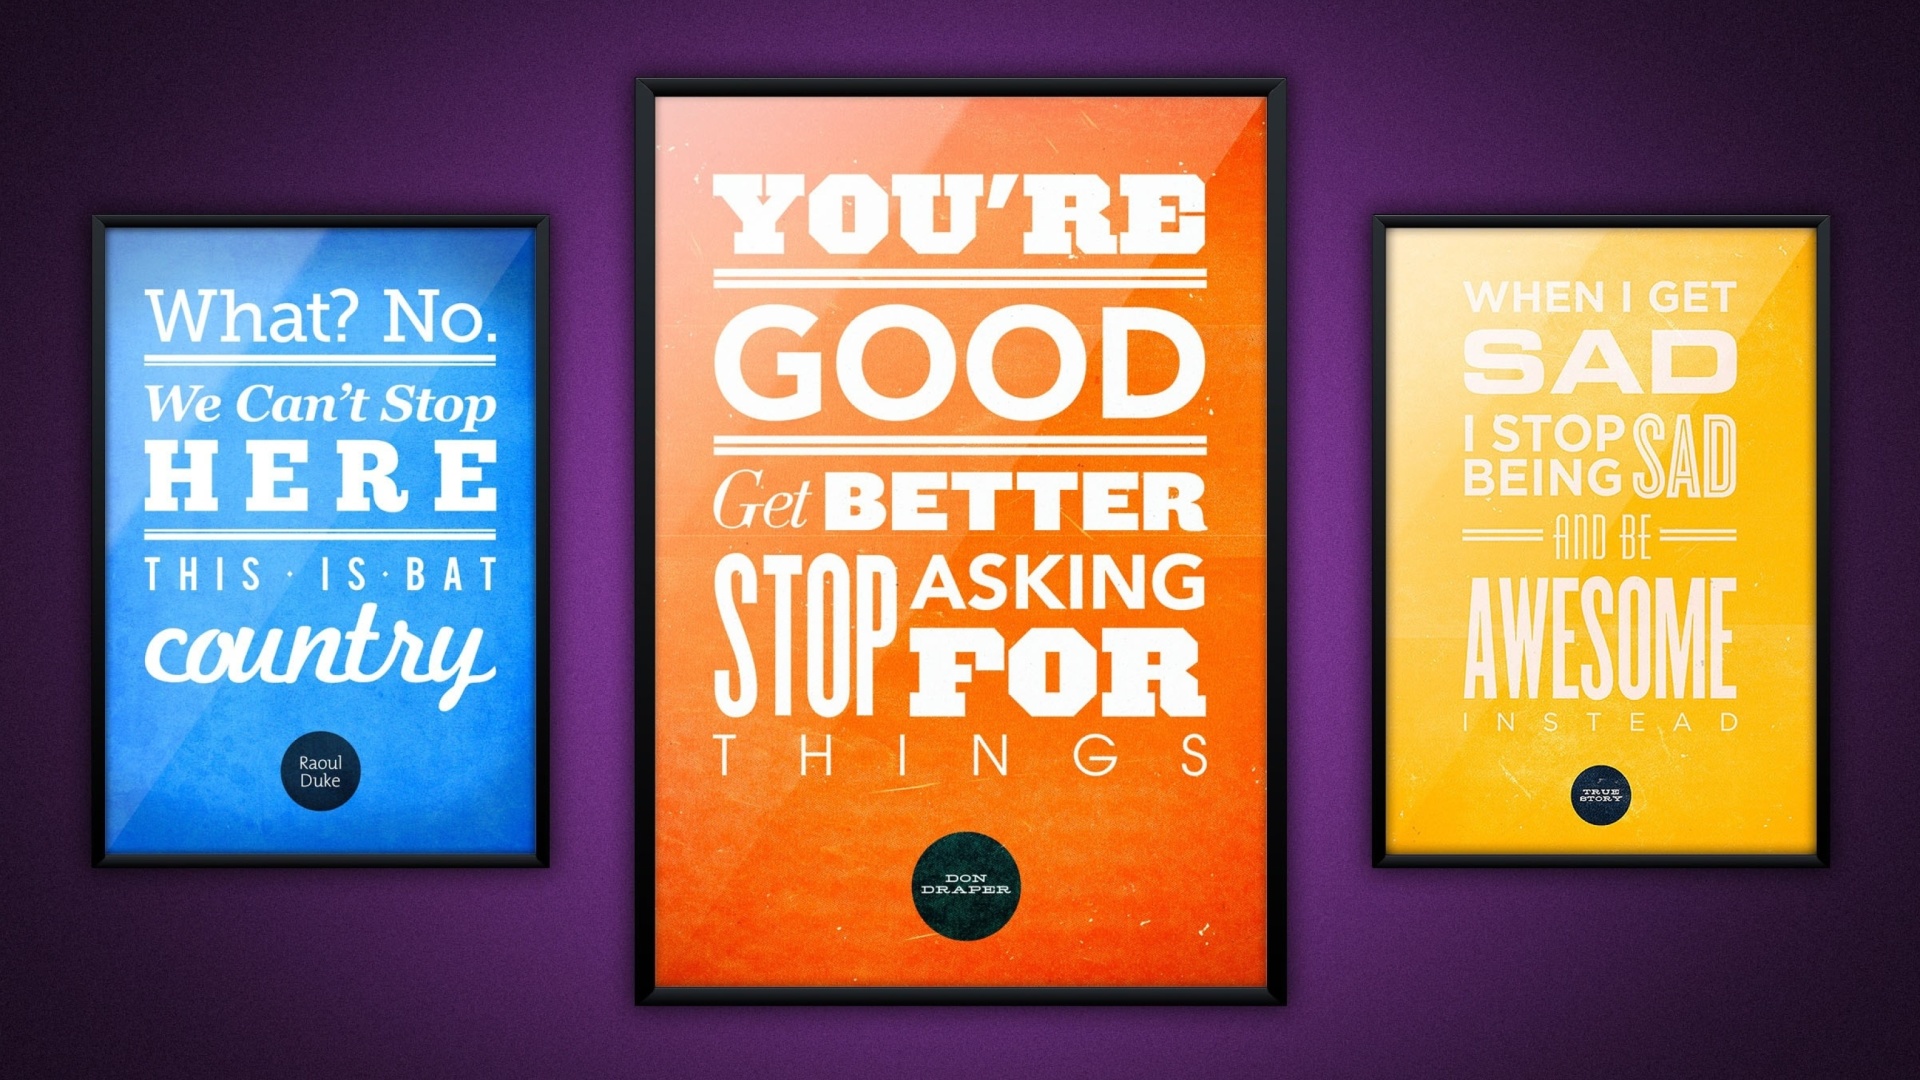 Motivational phrase You re good, Get better, Stop asking for Things wallpaper 1920x1080